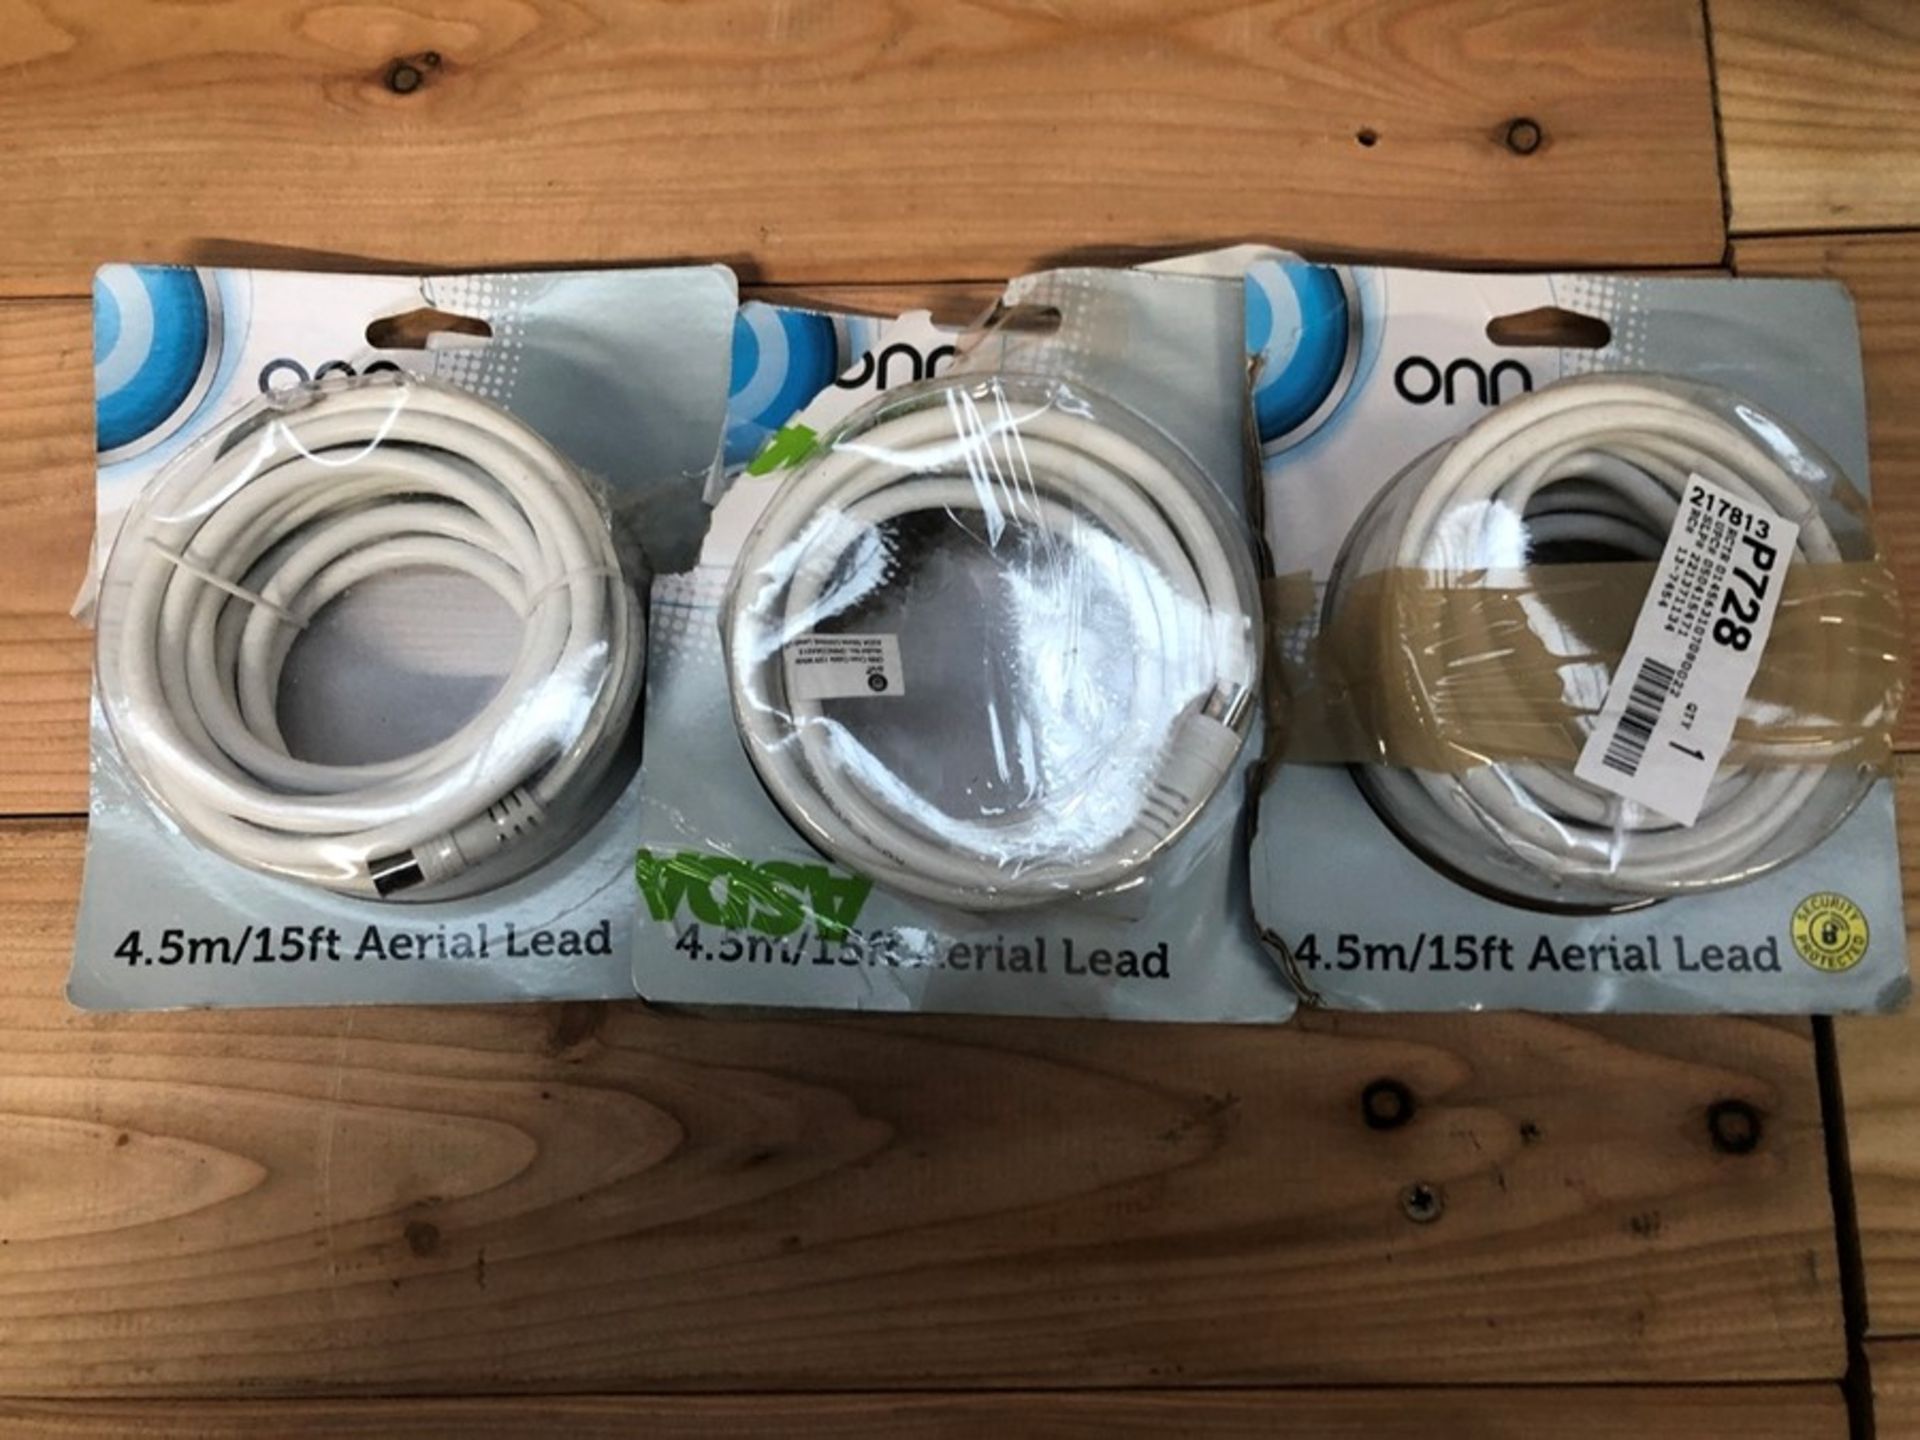 1 LOT TO CONTAIN 3 BOXED ONN 4.5/15FT AERIAL LEADS / RRP £30.00 / BL - 7813 (PUBLIC VIEWING